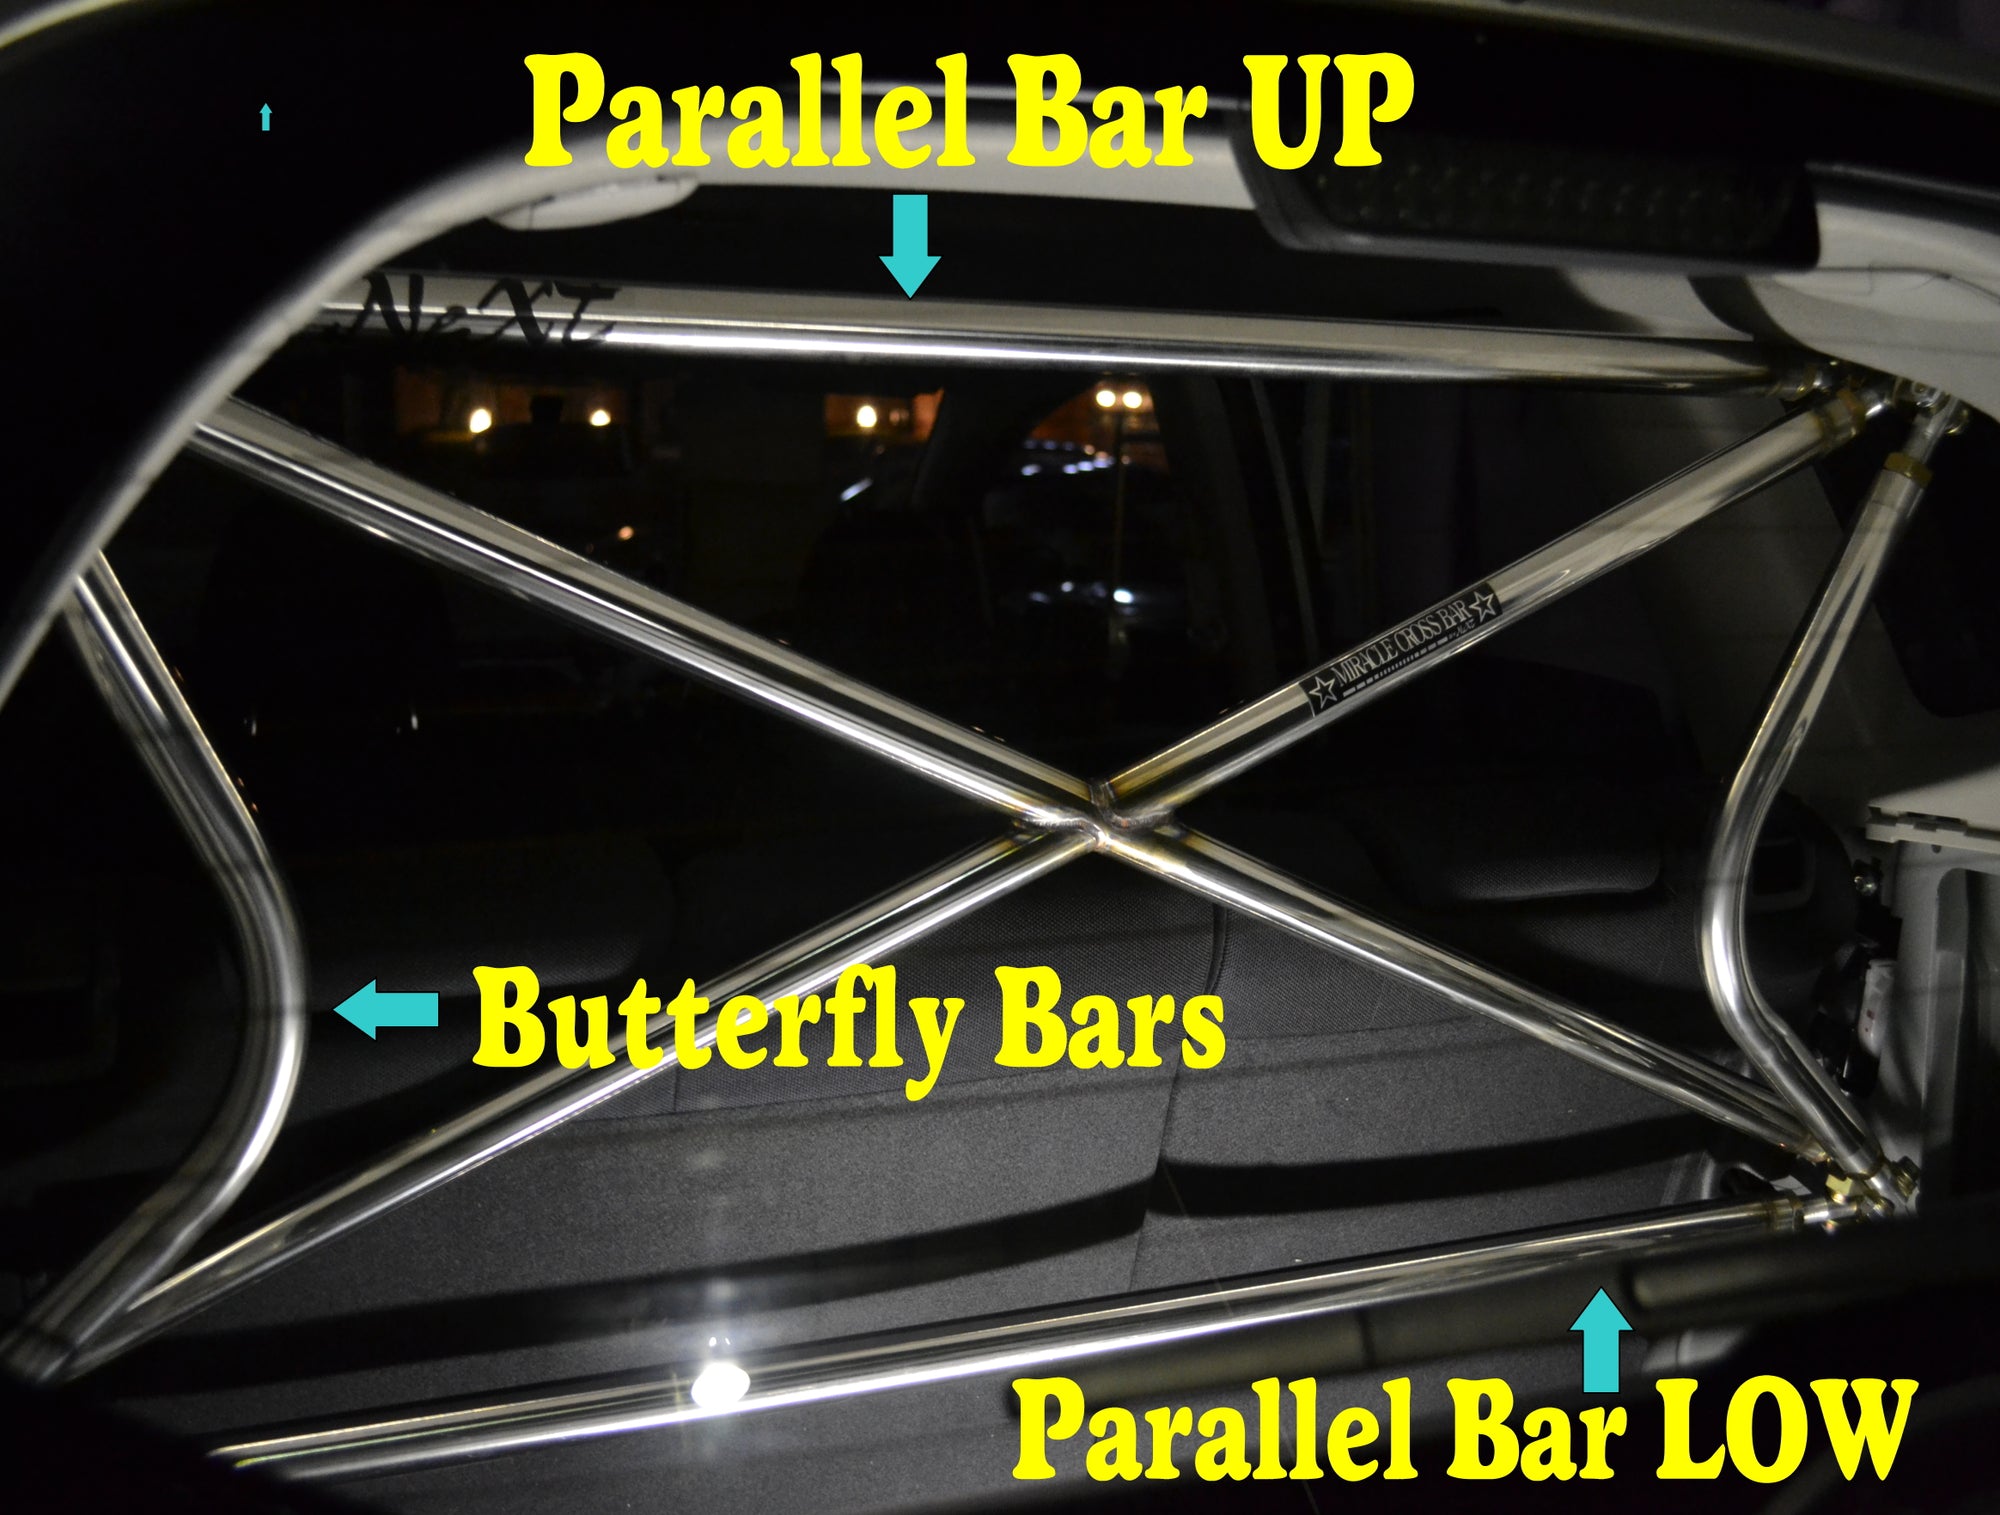 NEXT MIRACLE CROSS BAR BUTTERFLY BAR RIGHT & LEFT STAINLESS 32 FOR SUBARU IMPREZA GC8 C B NEXT-01592